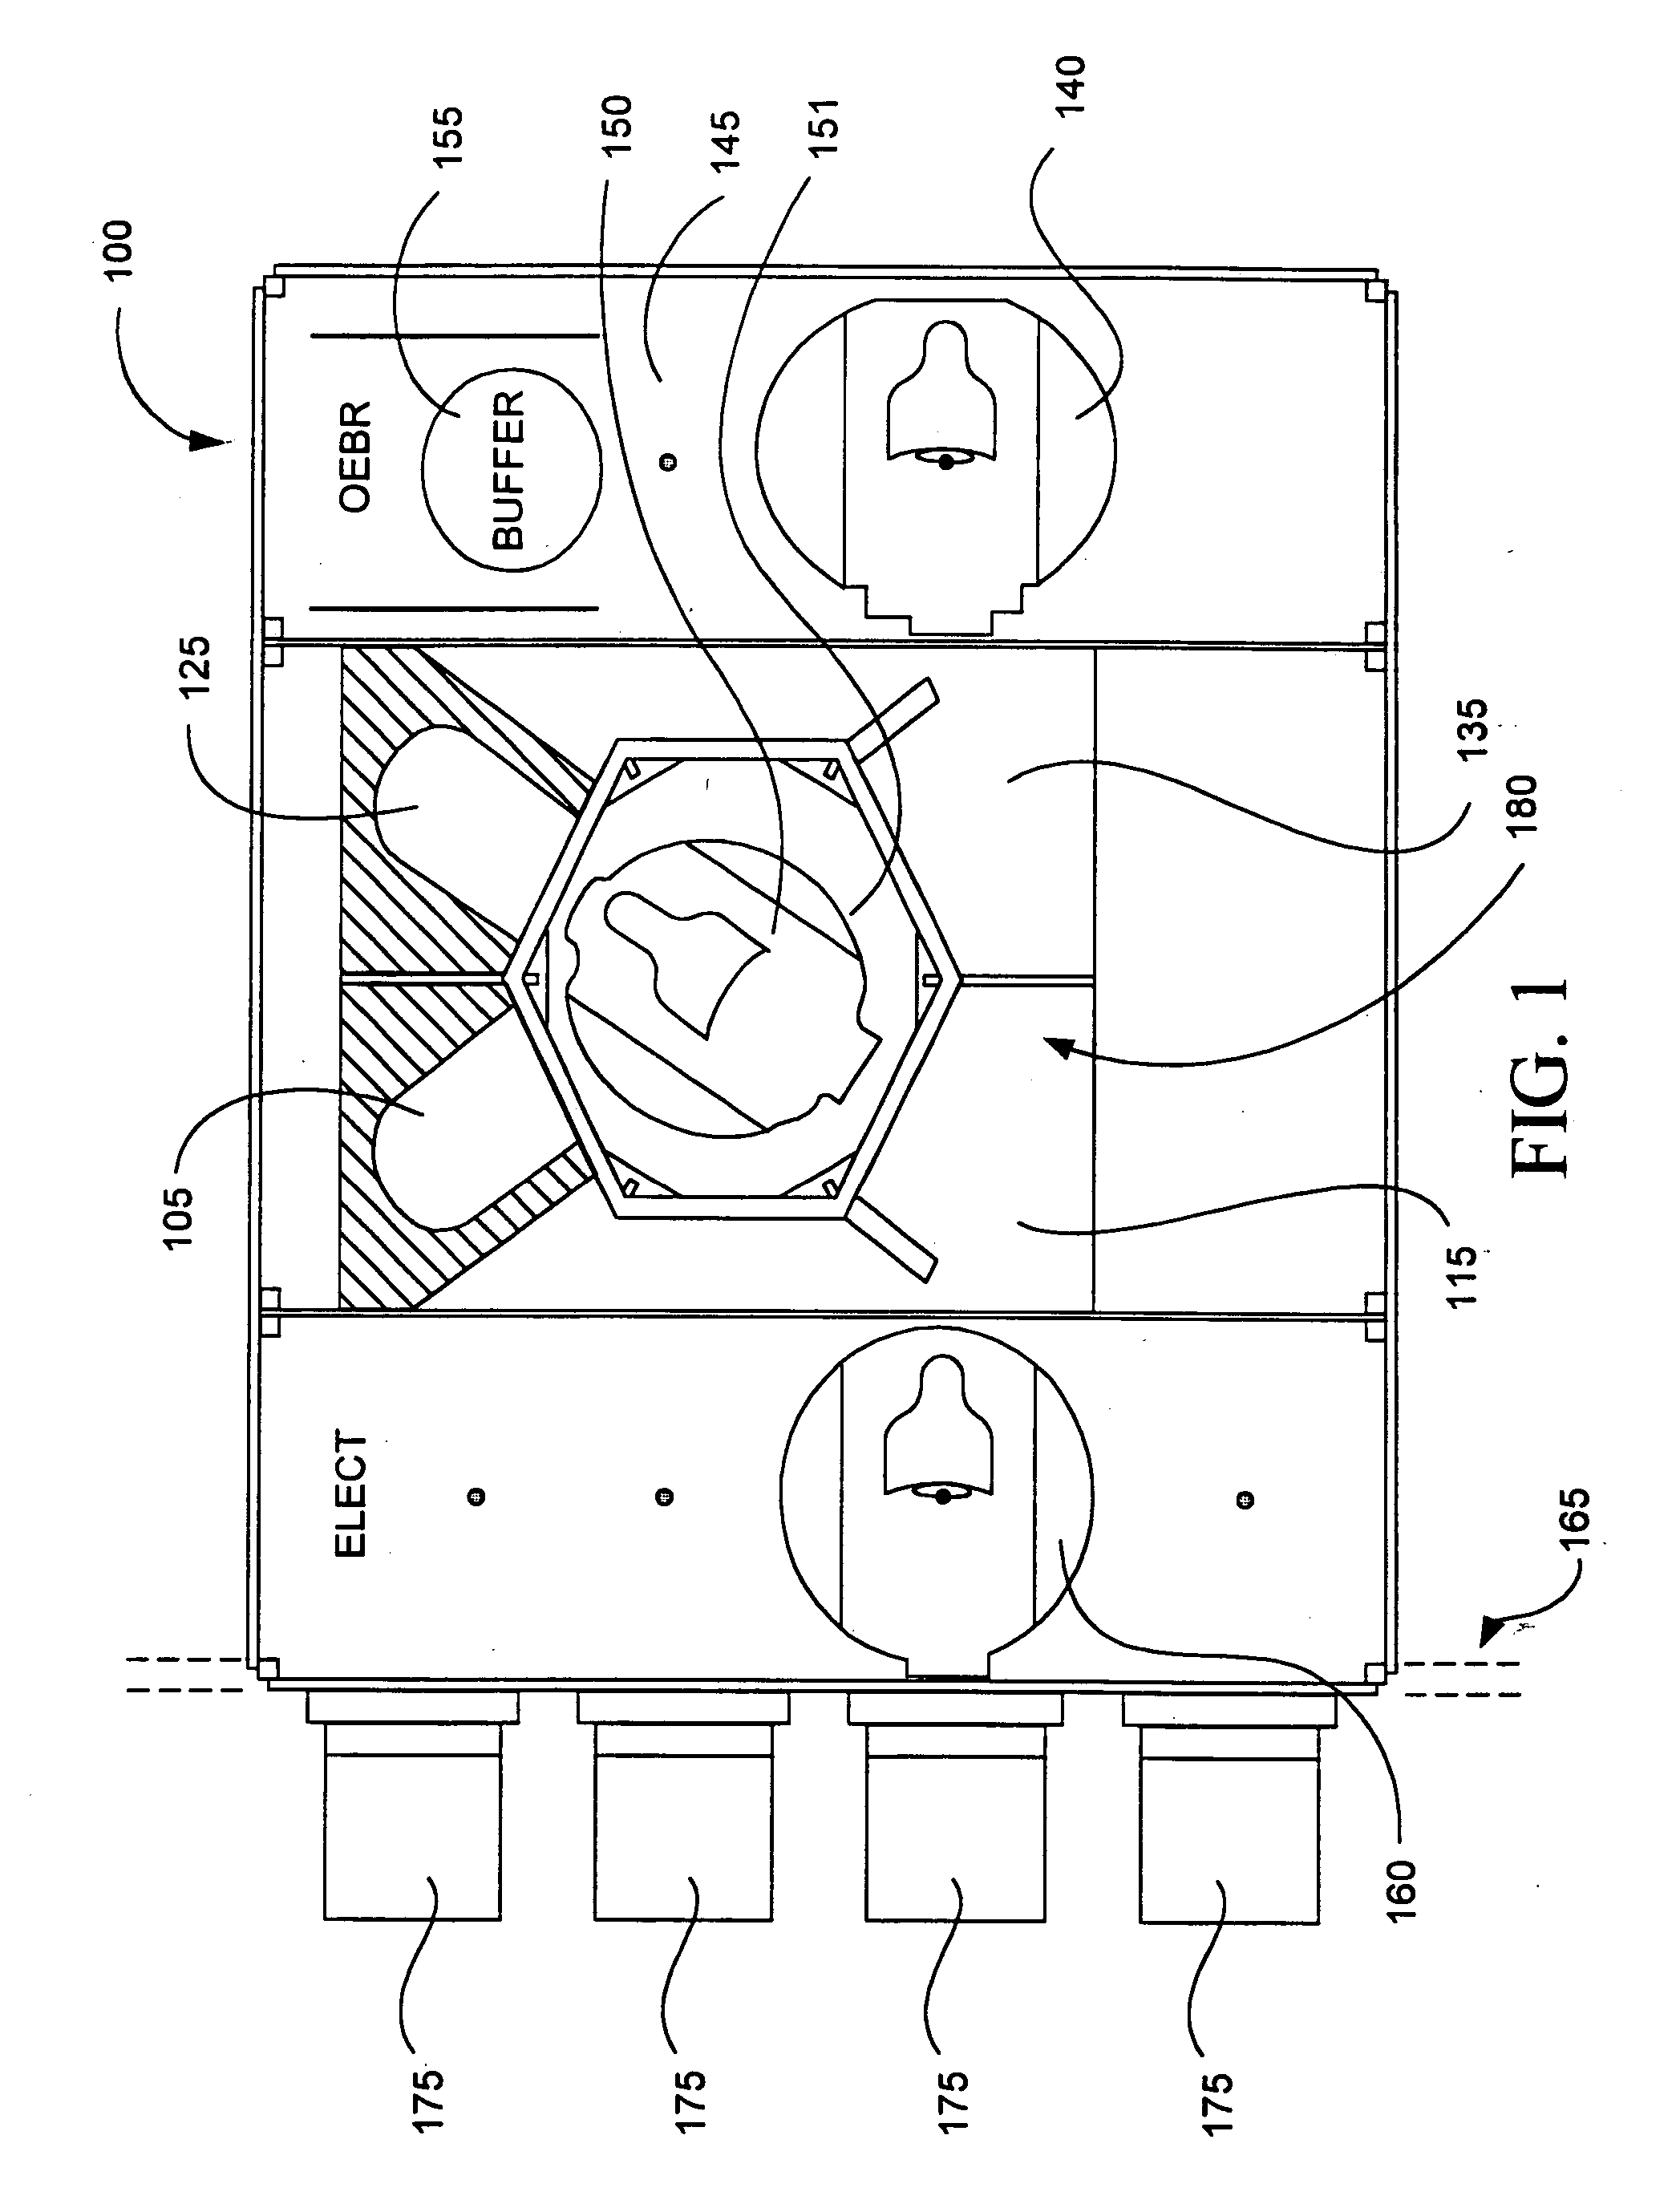 Apparatus for processing wafers